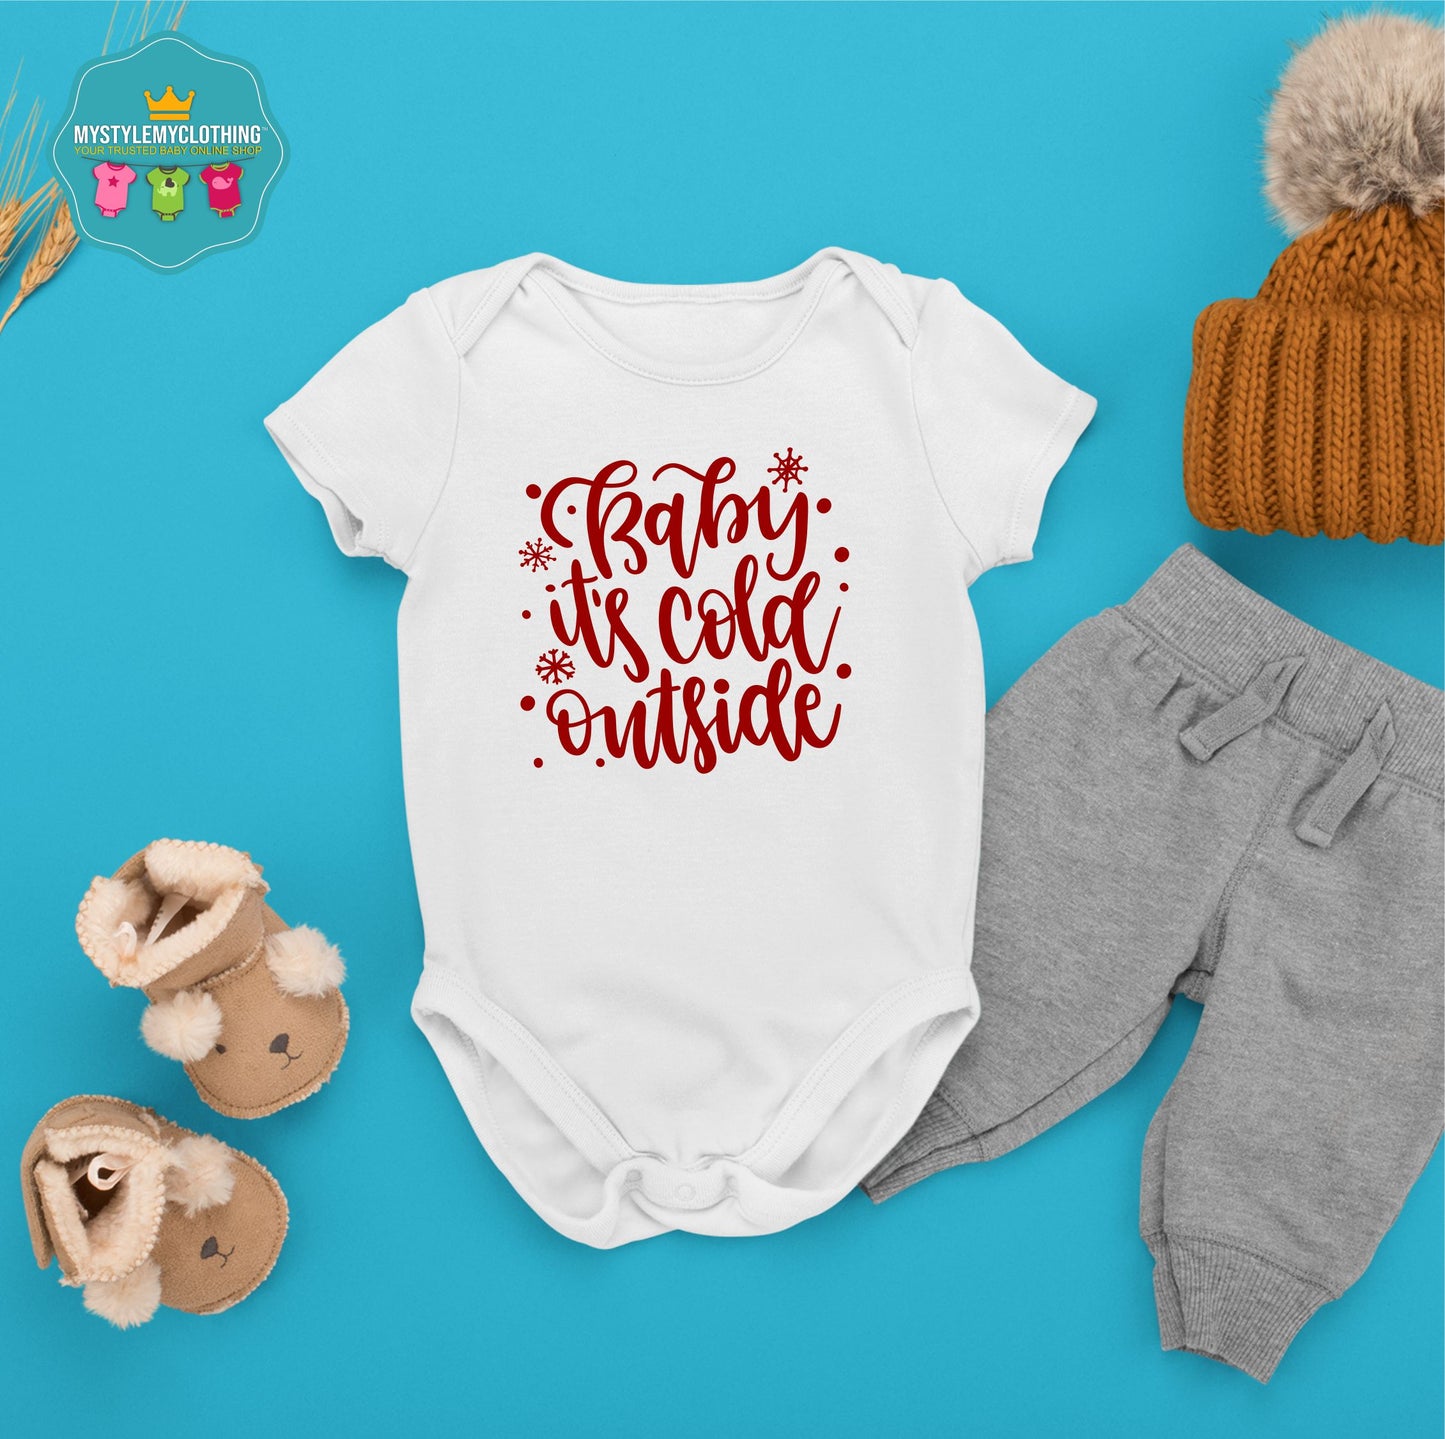 Baby Christmas Holiday Onesies - Its Cold Outside